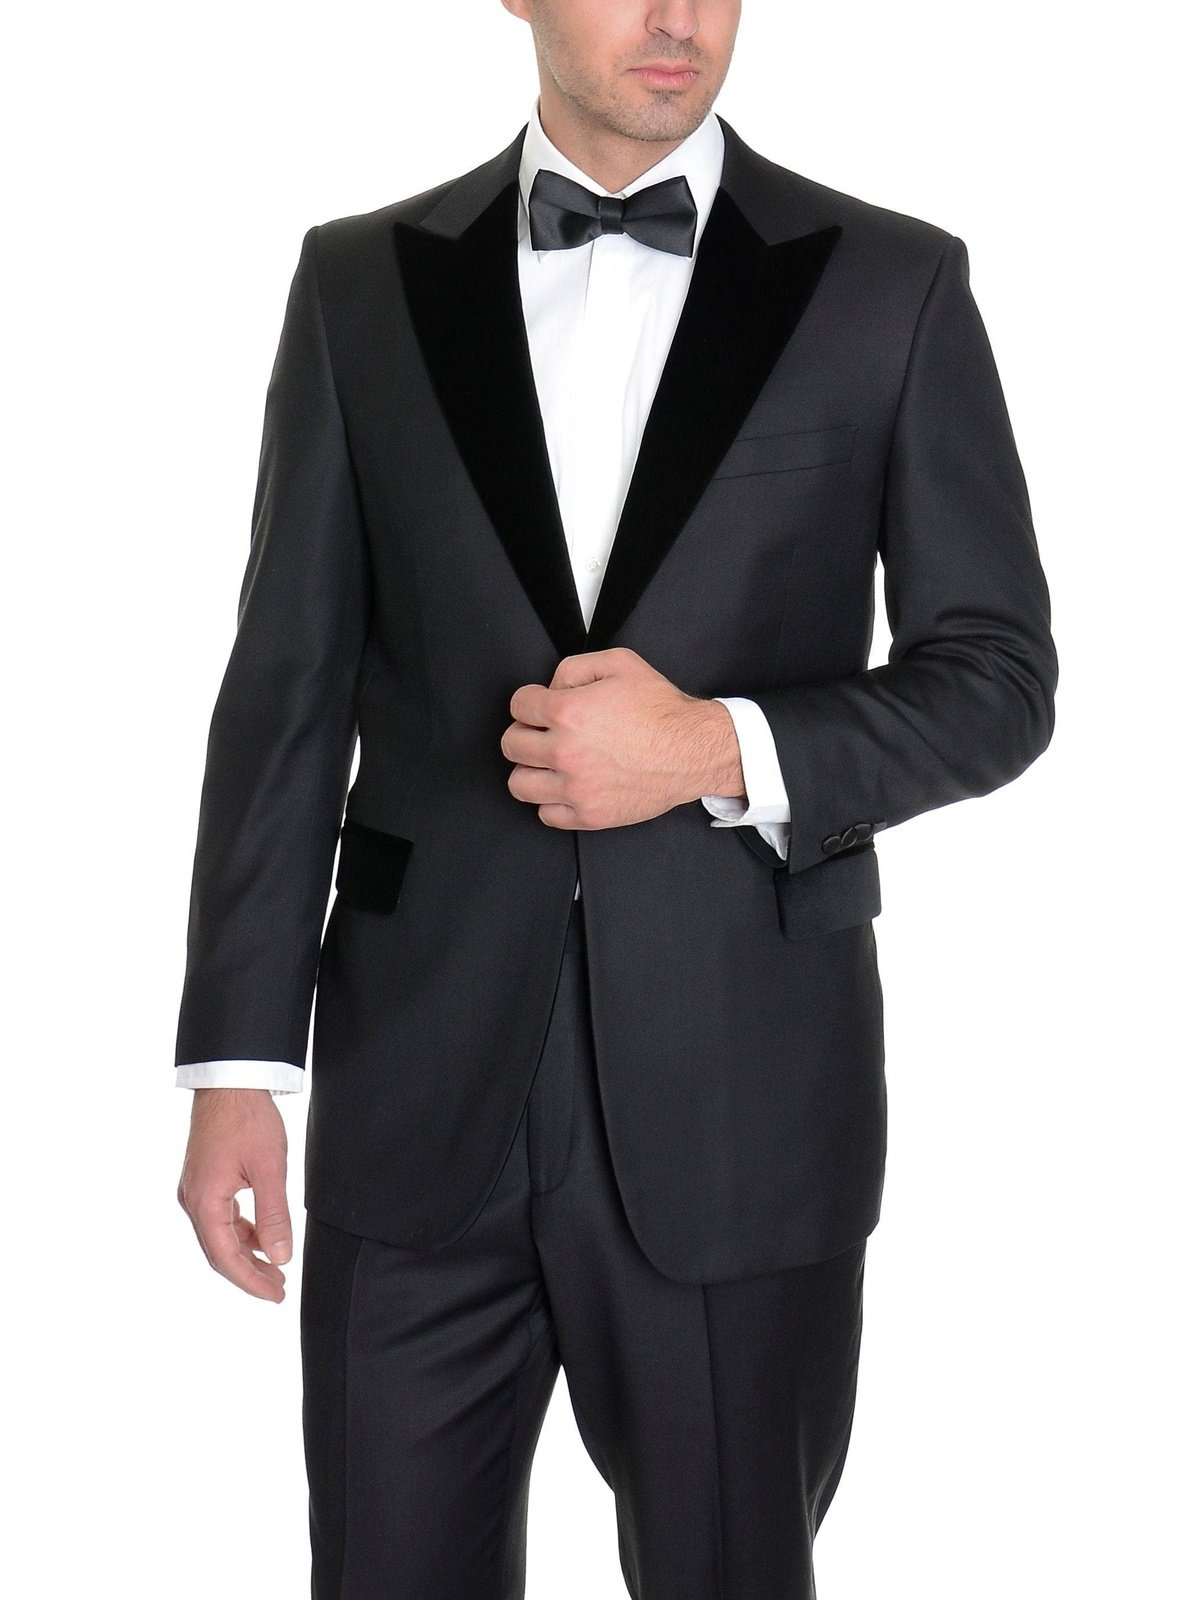 Label M TUXEDOS Modern Fit Solid Black One Button Wool Blend Tuxedo Suit With Peak Lapels